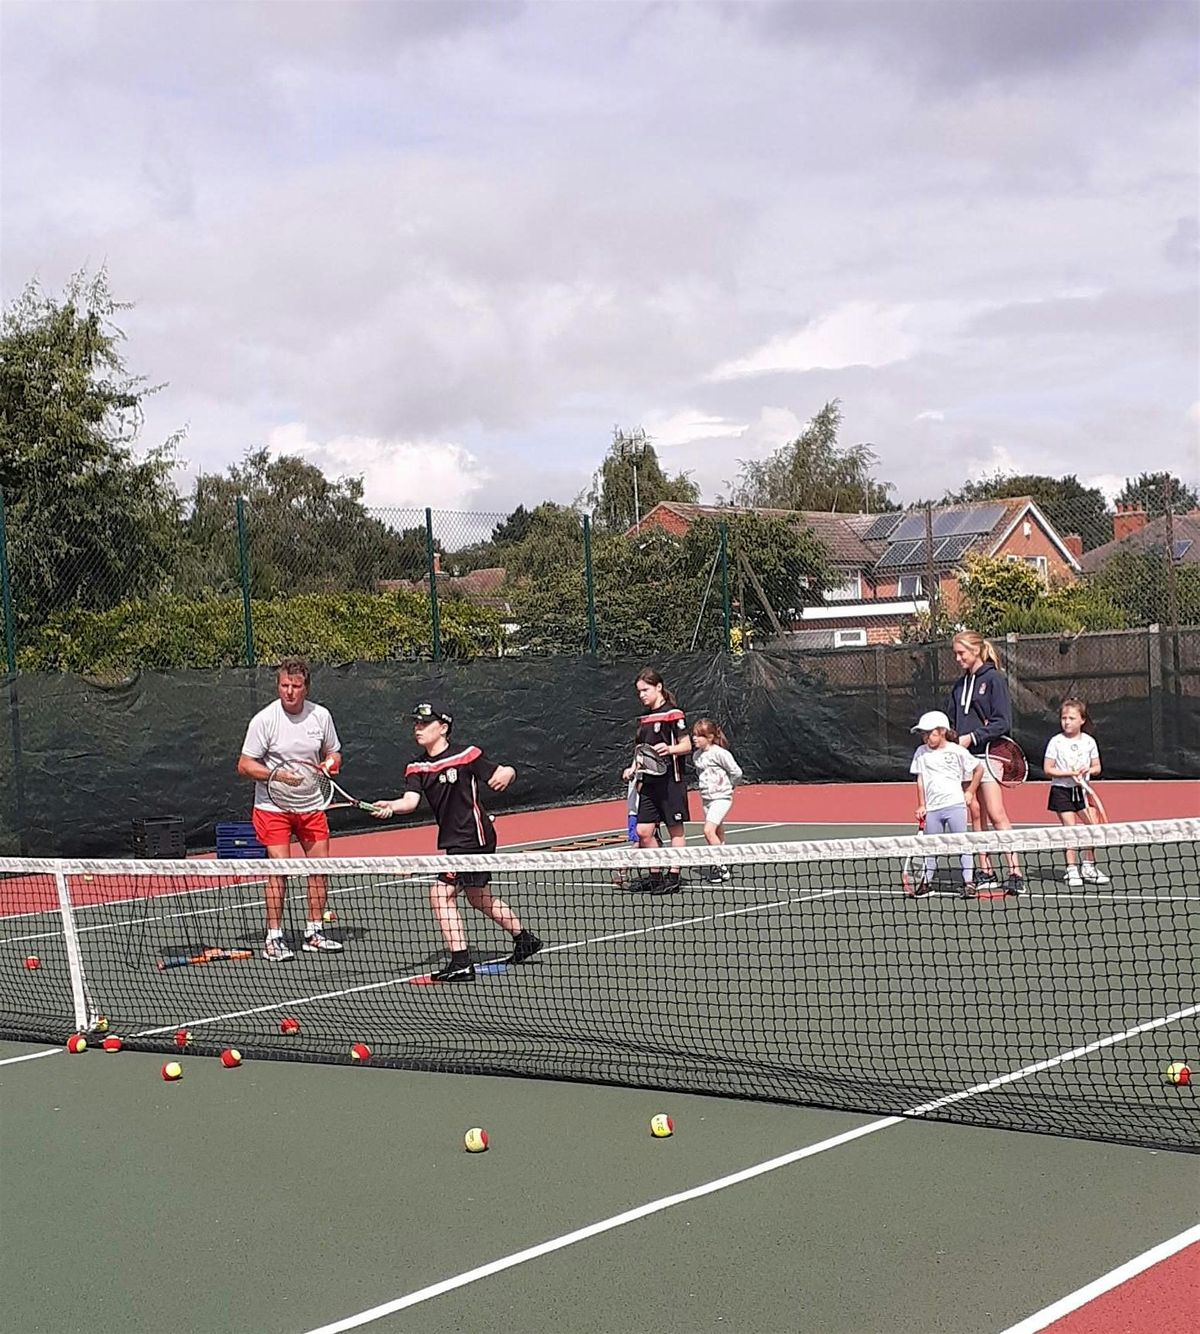 Free October Tennis Sessions in Retford Ages 7-16 with breakfast & lunch